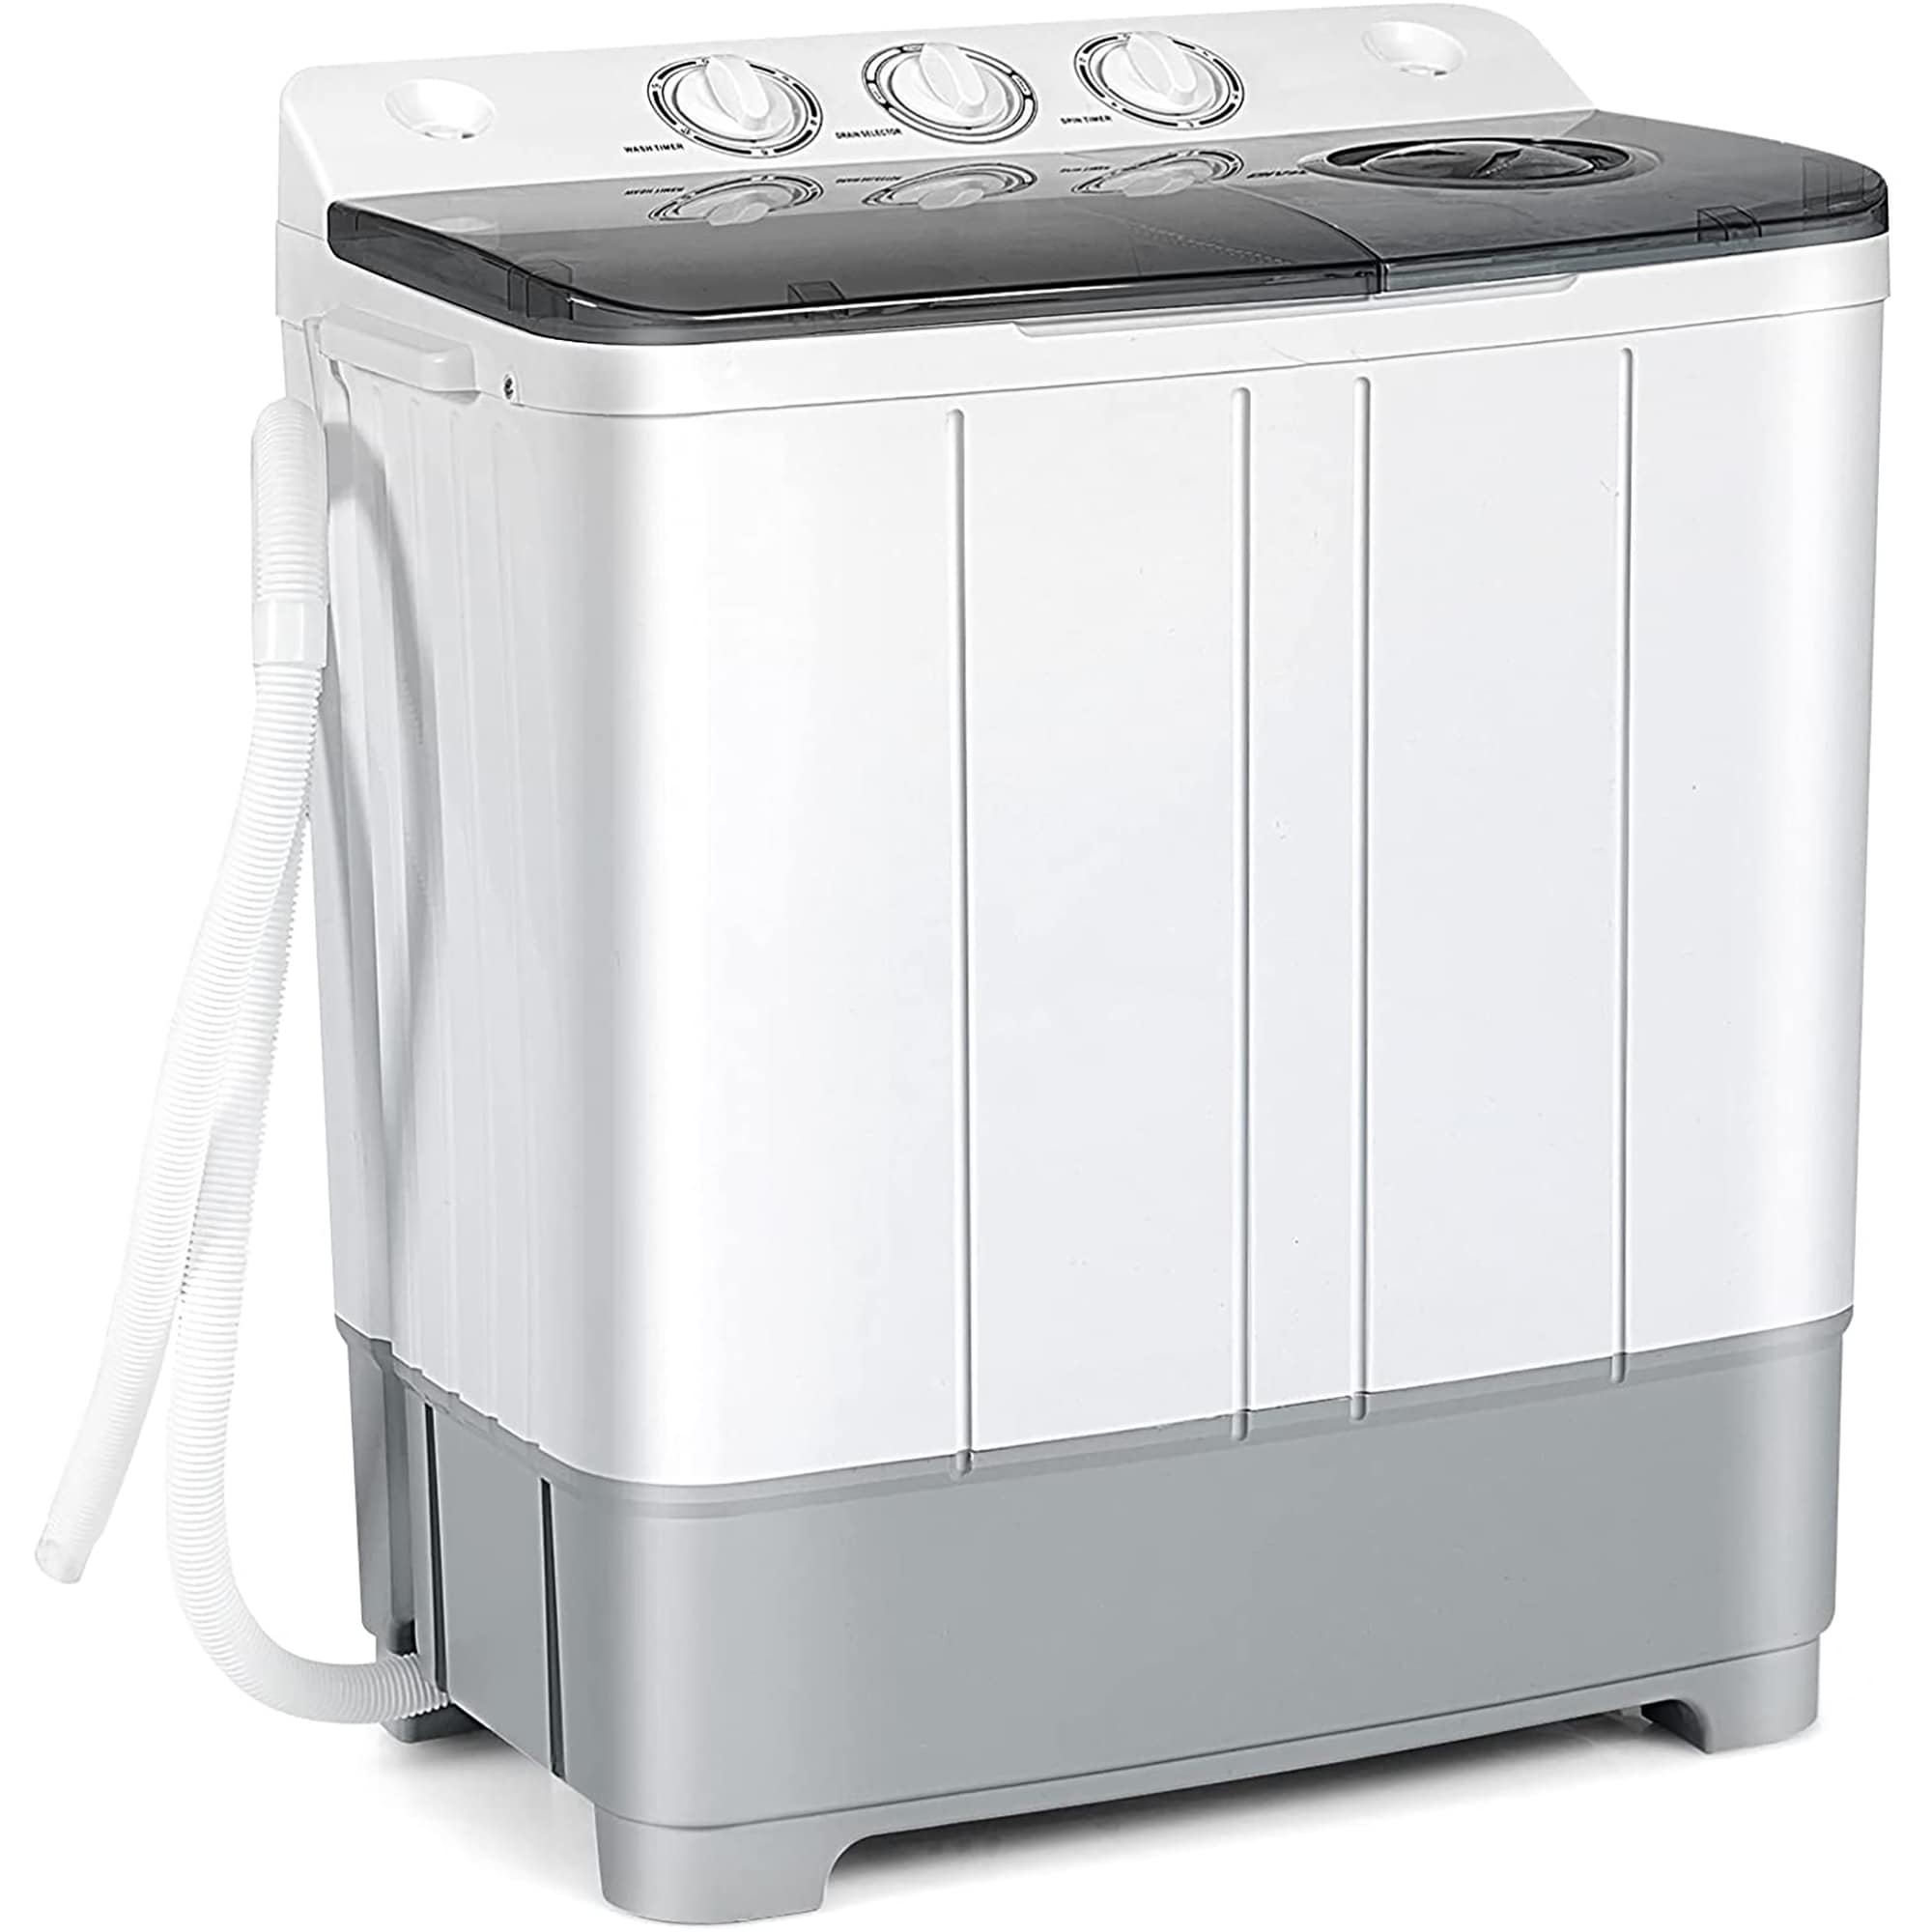 https://ak1.ostkcdn.com/images/products/is/images/direct/a2f069ff1913db5c184d7279b0cdd8a6ac5439d6/Costway-Portable-Twin-Tub-Washing-Machine-Washer%2813.2lbs%29-%26-Spinner.jpg